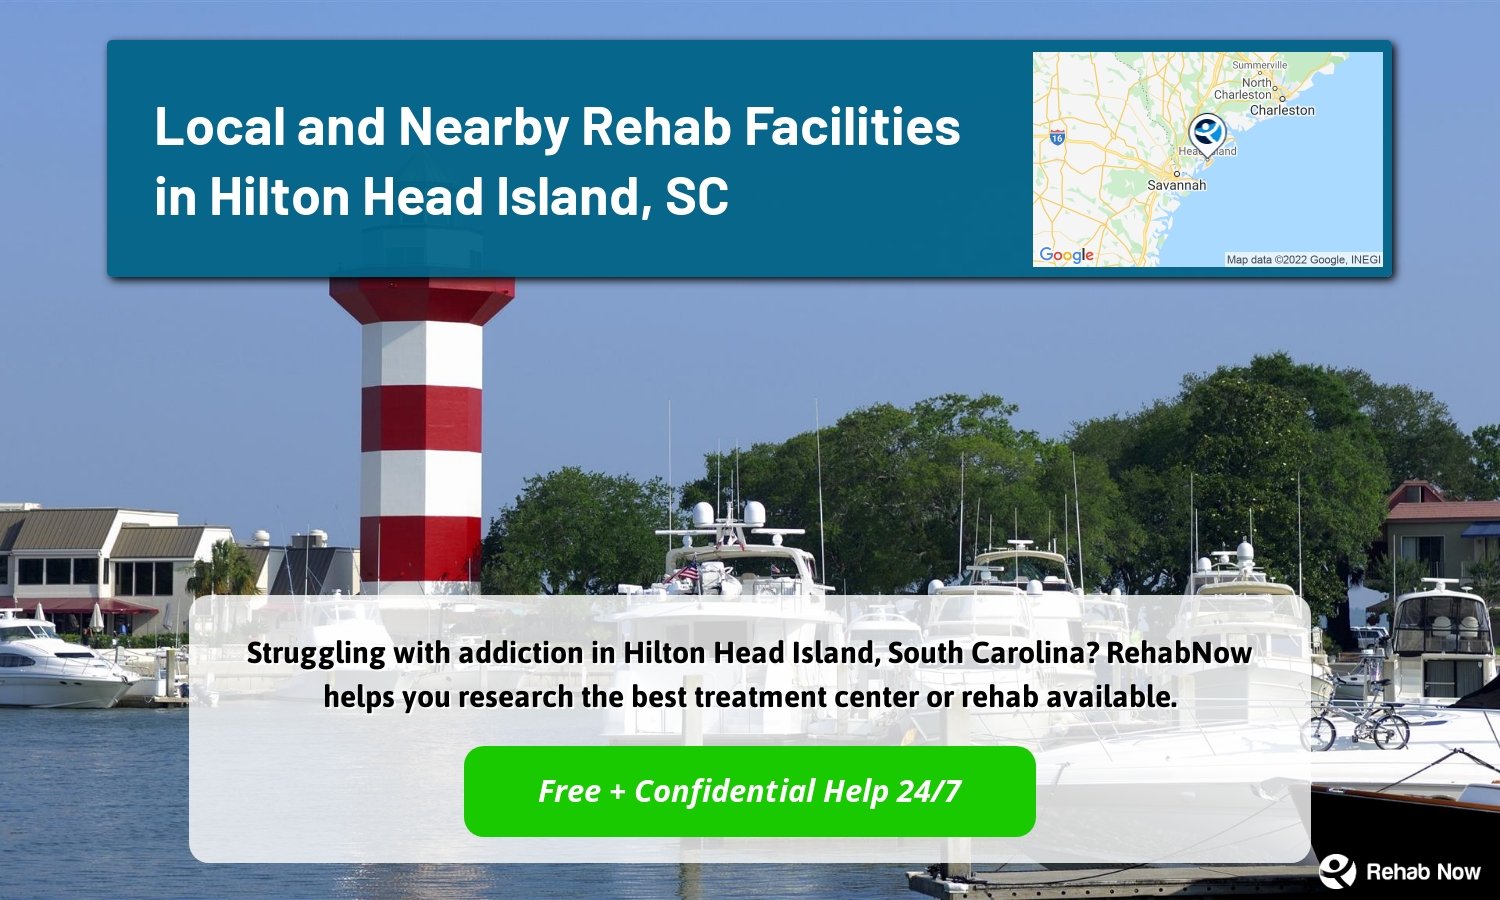 Struggling with addiction in Hilton Head Island, South Carolina? RehabNow helps you research the best treatment center or rehab available.